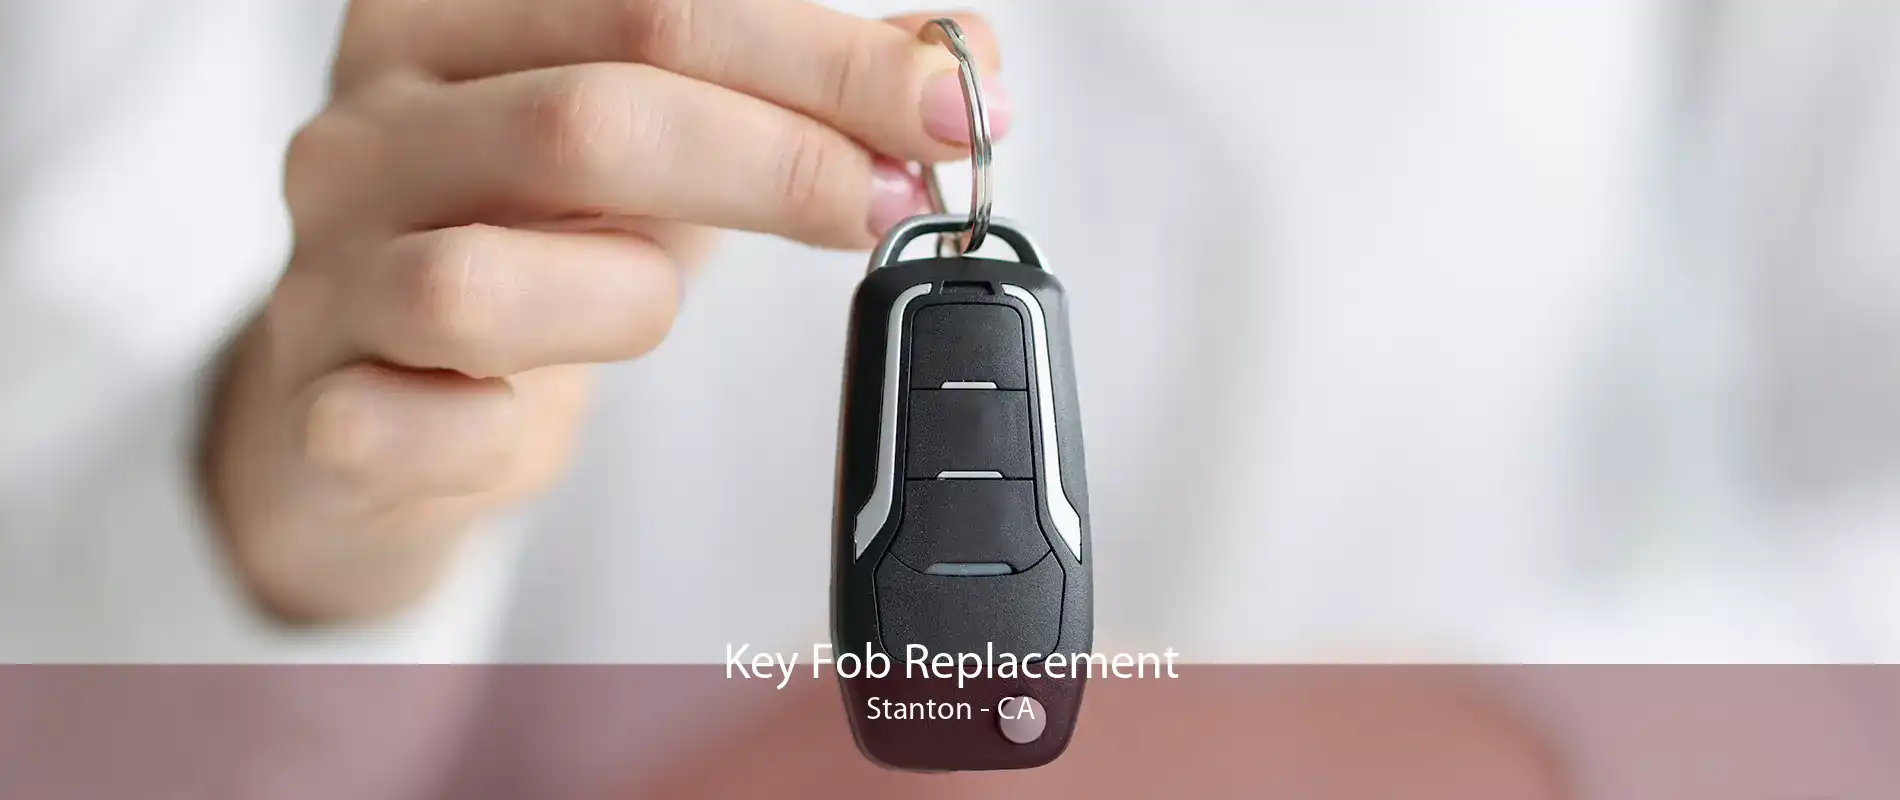 Key Fob Replacement Stanton - CA